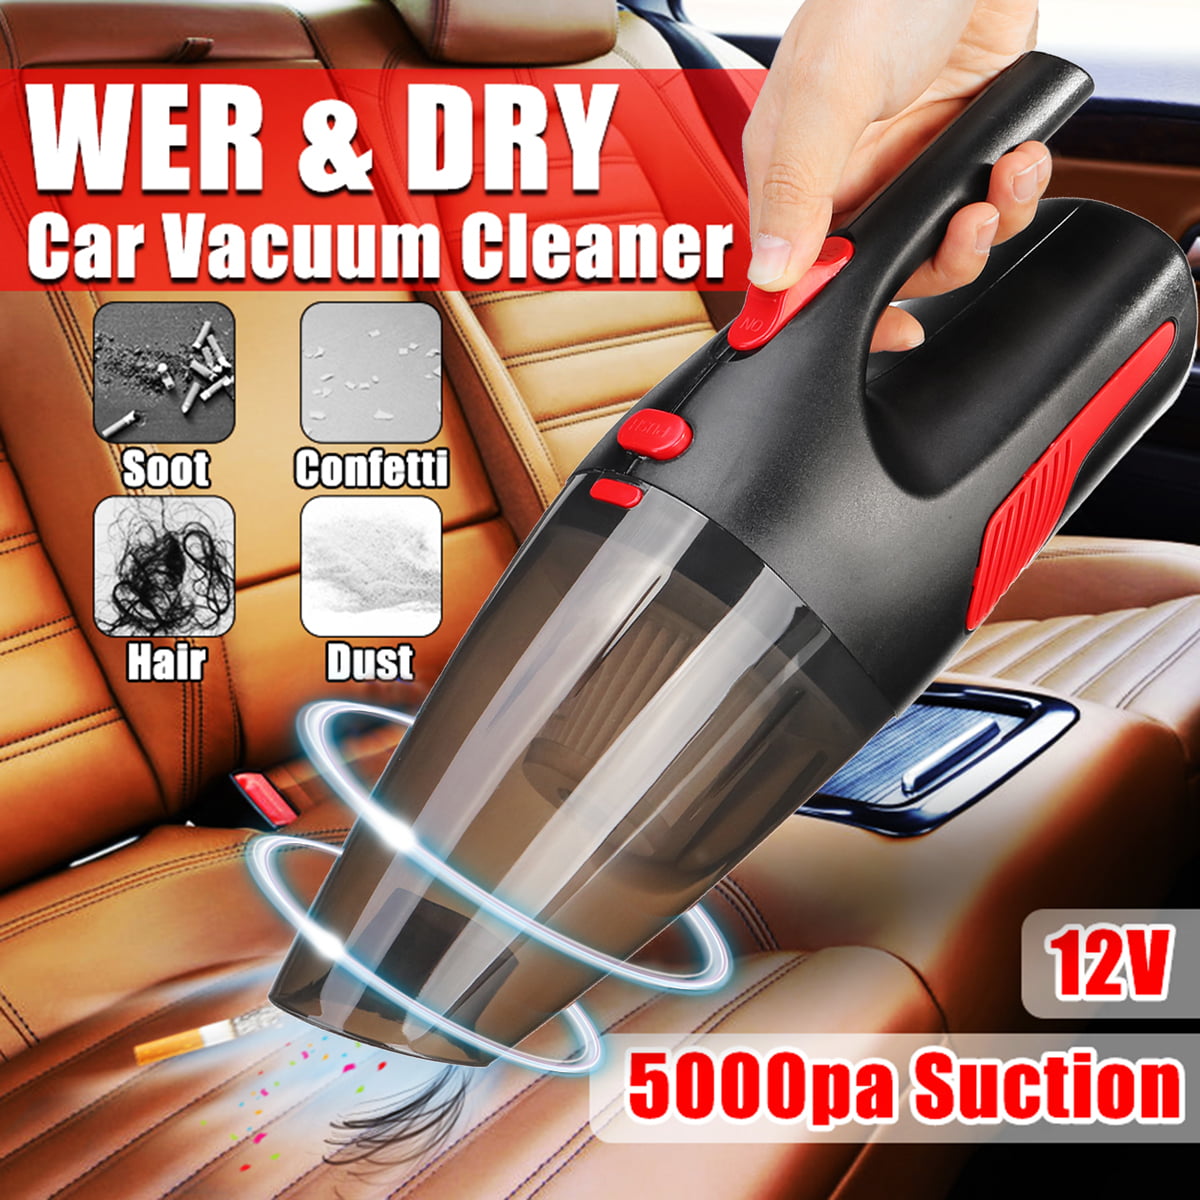 12V/120W Car Vacuum Cleaner Strong Suction Portable Handheld Auto Vacuum Cleaner 